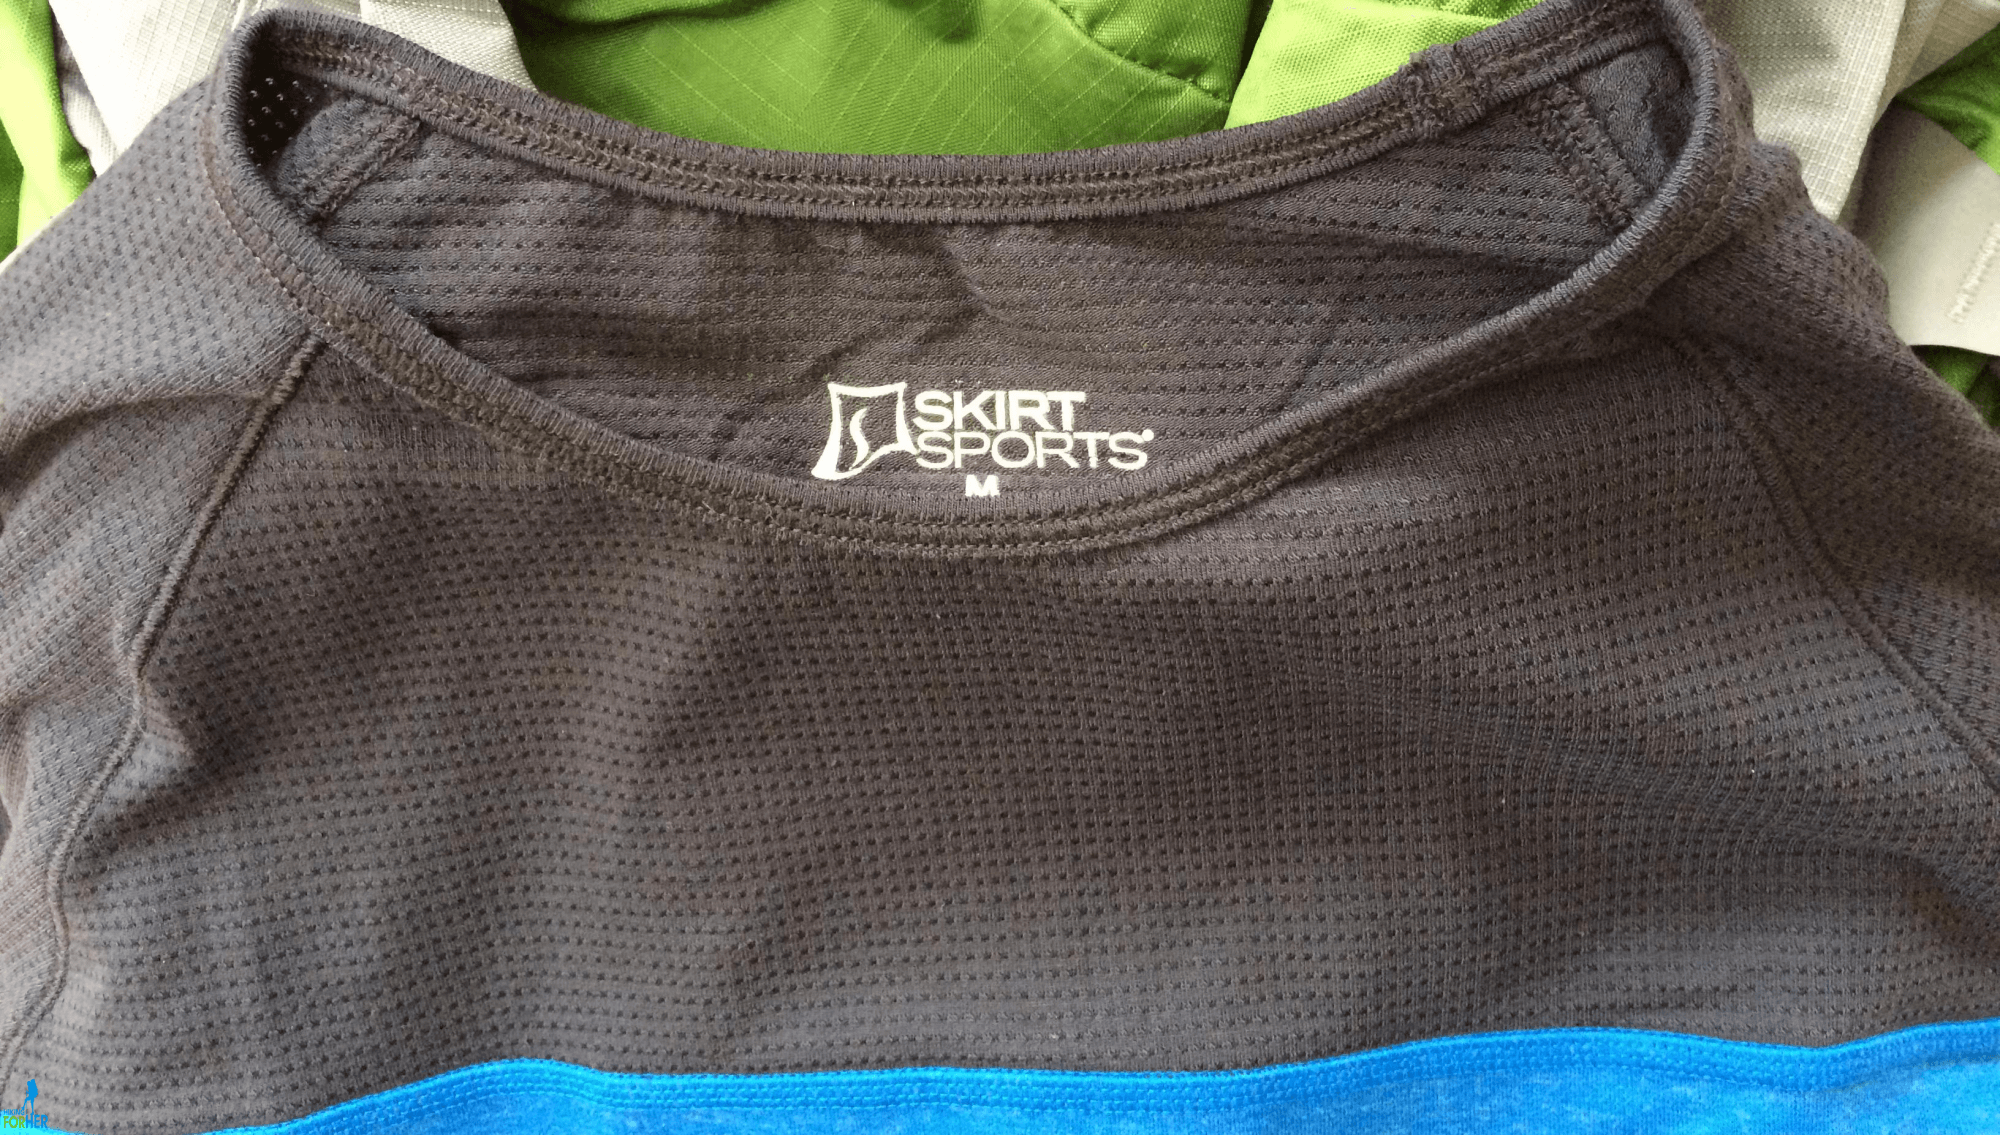 Skirt Sports Review: Hiking Clothing For Women